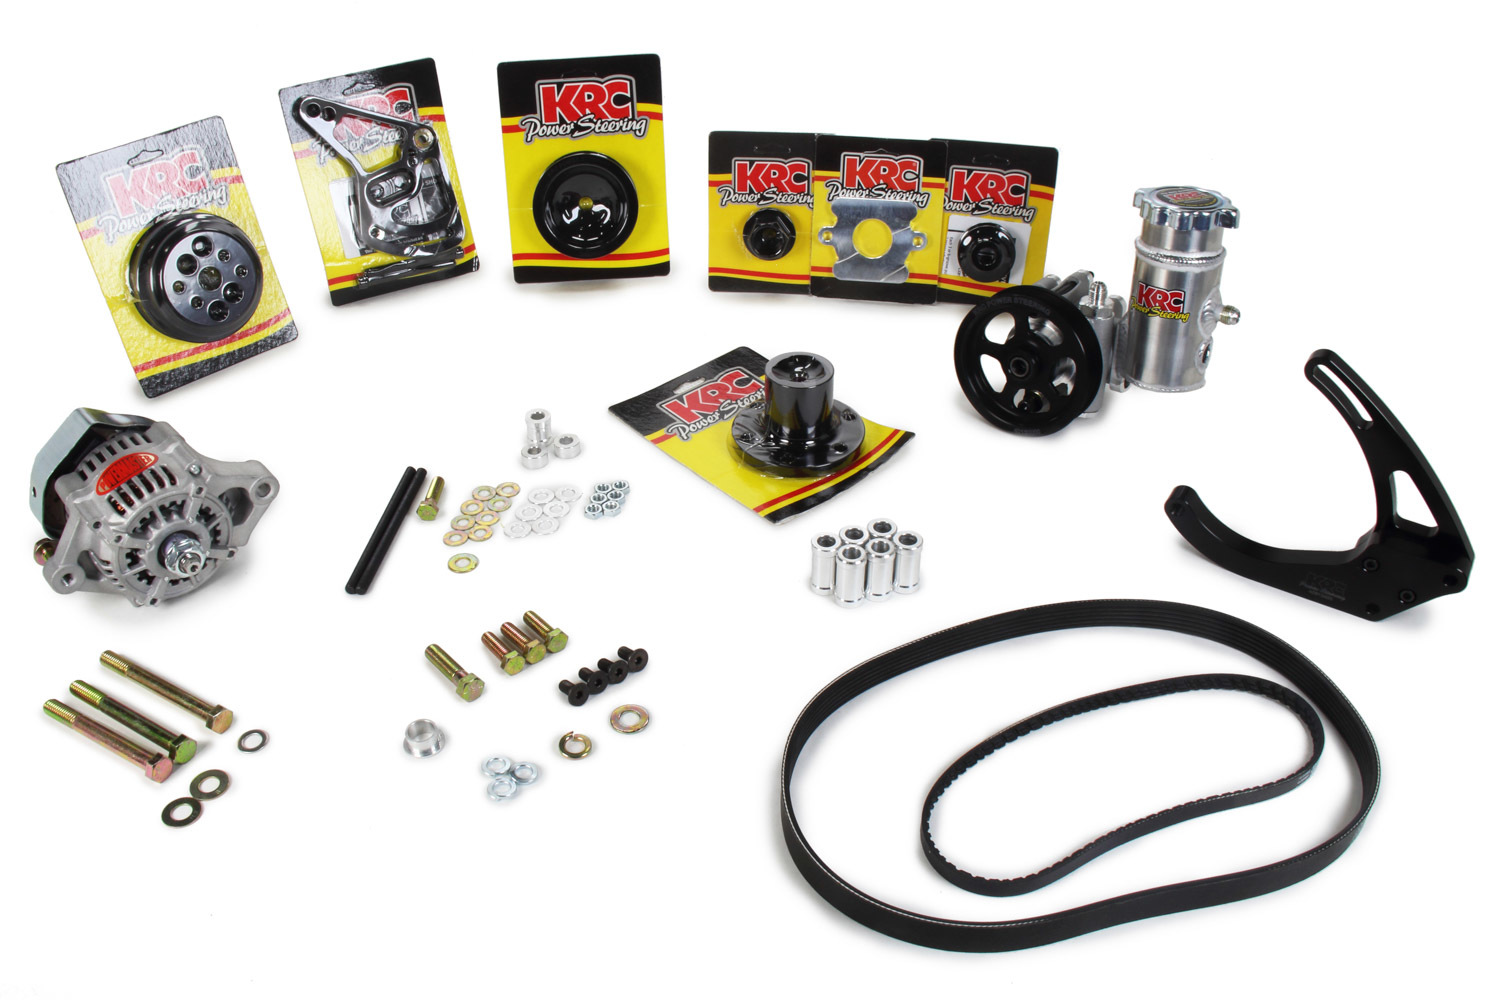 KRC Power Steering KIT67347122 Pulley Kit, Pro Series, 3 and 6-Rib Serpentine, Head Mount PS Pump / Denso Alternator / Hardware / PS Tank Included, Aluminum, Black Anodized, Small Block Ford, Kit